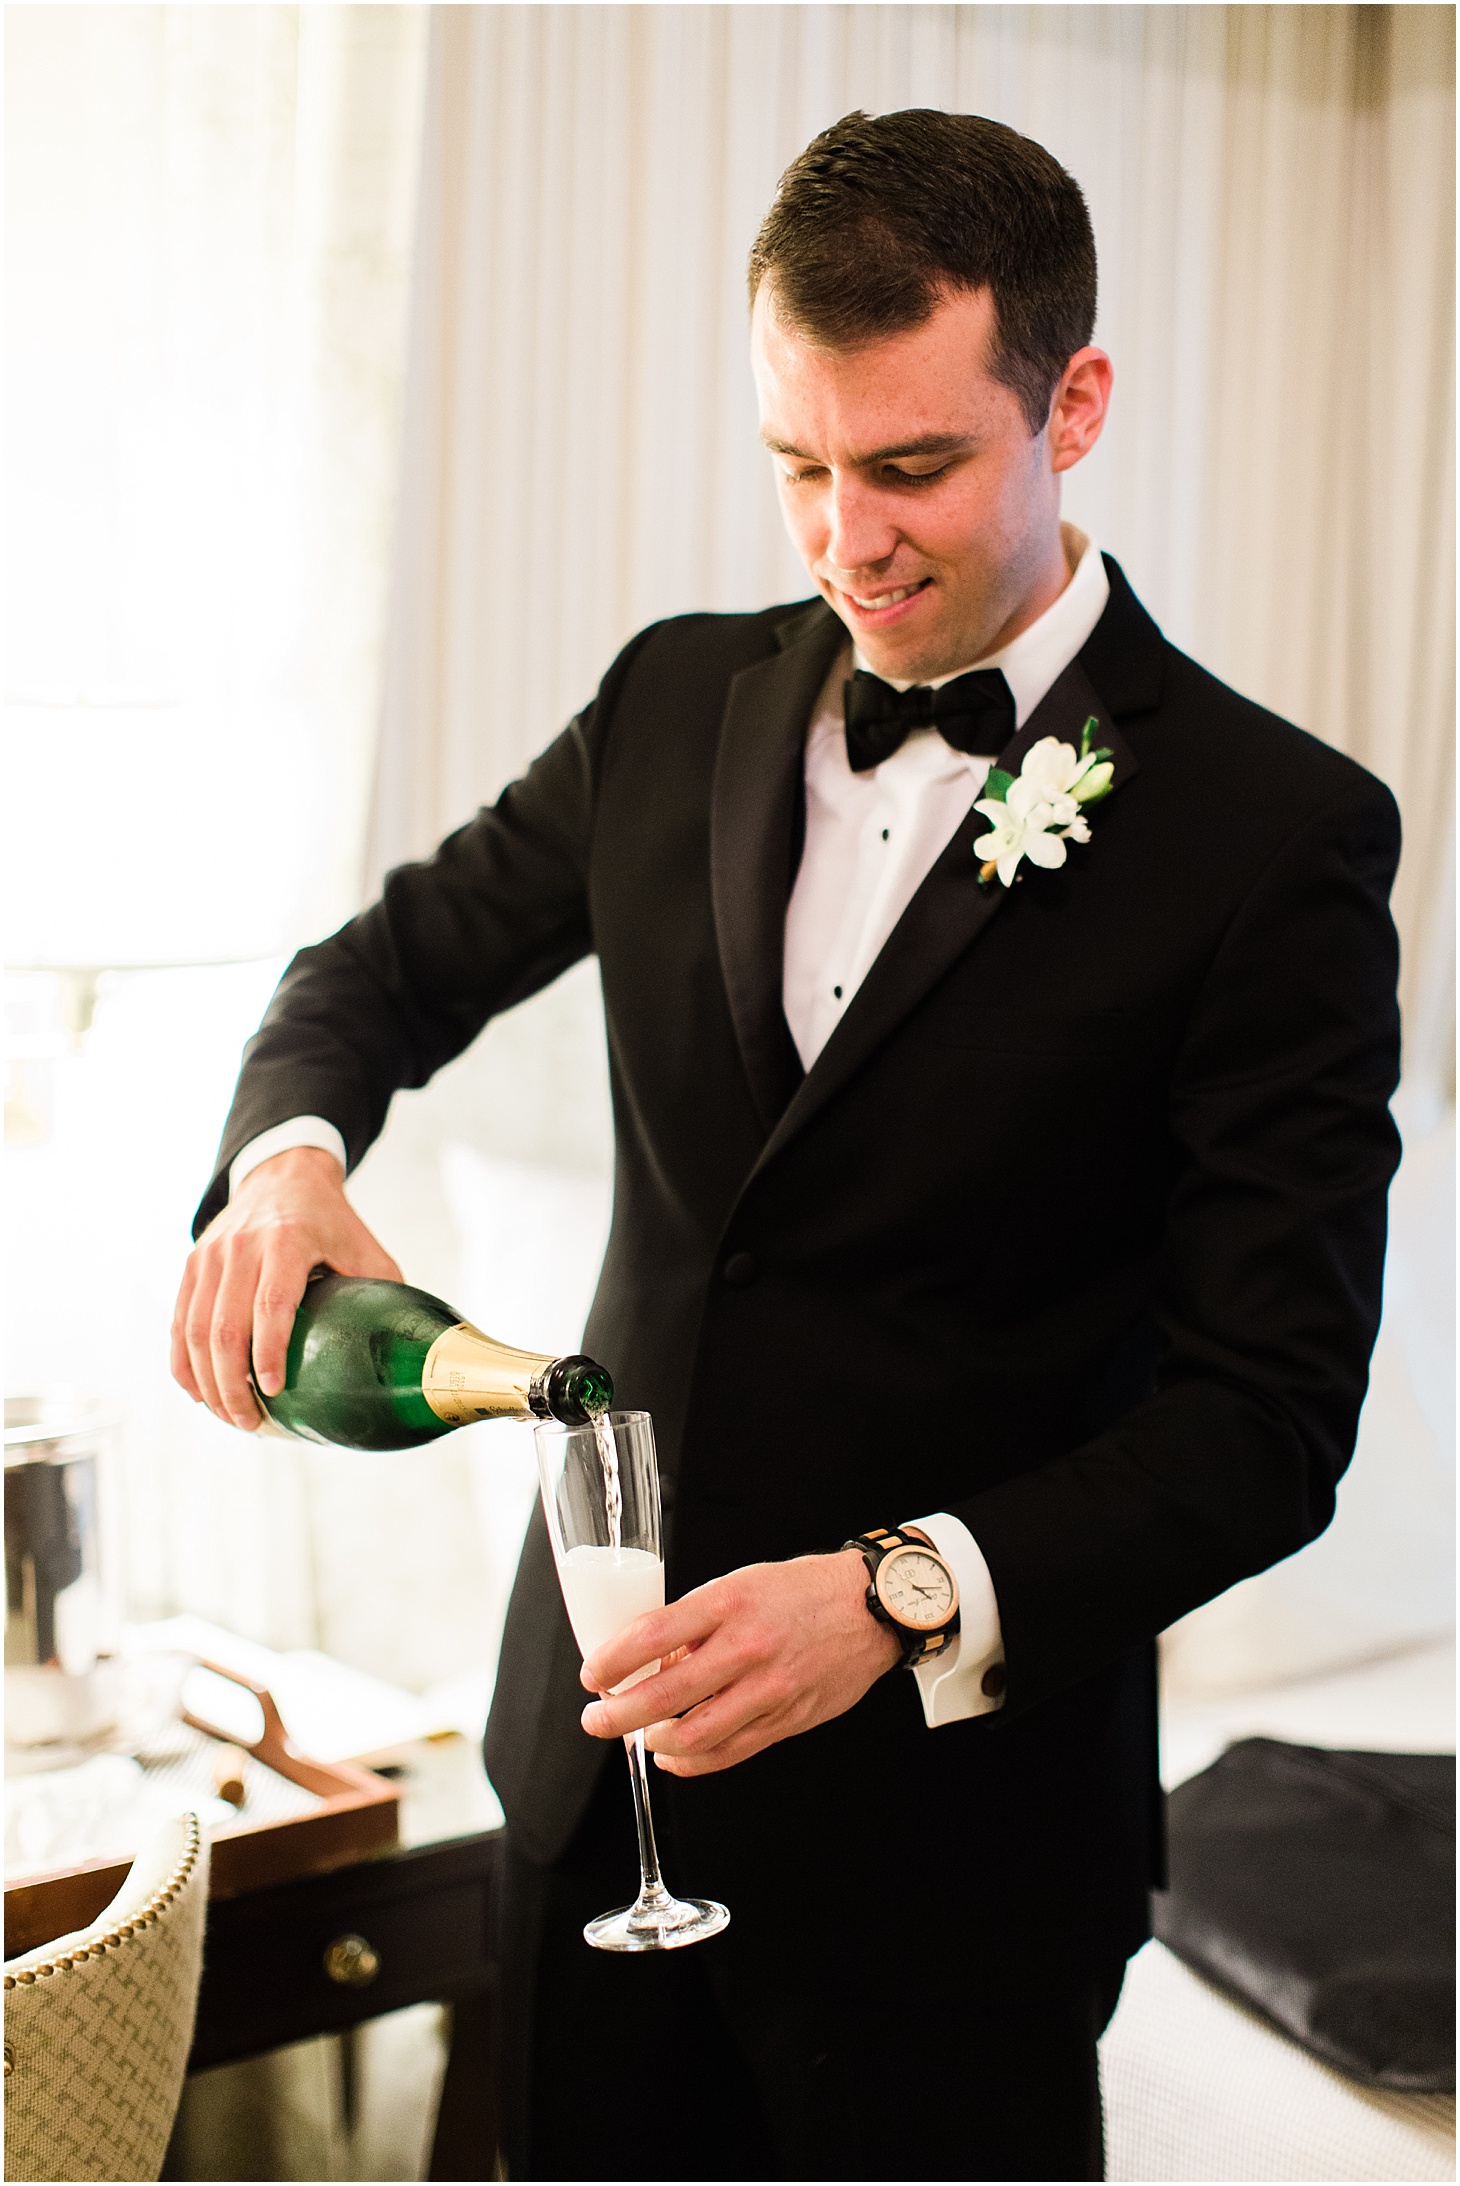 Groom Getting Ready at Hay-Adams Hotel, Black Tie Hay-Adams Wedding with Summer Florals, Ceremony at Capitol Hill Baptist Church, Sarah Bradshaw Photography, DC Wedding Photographer